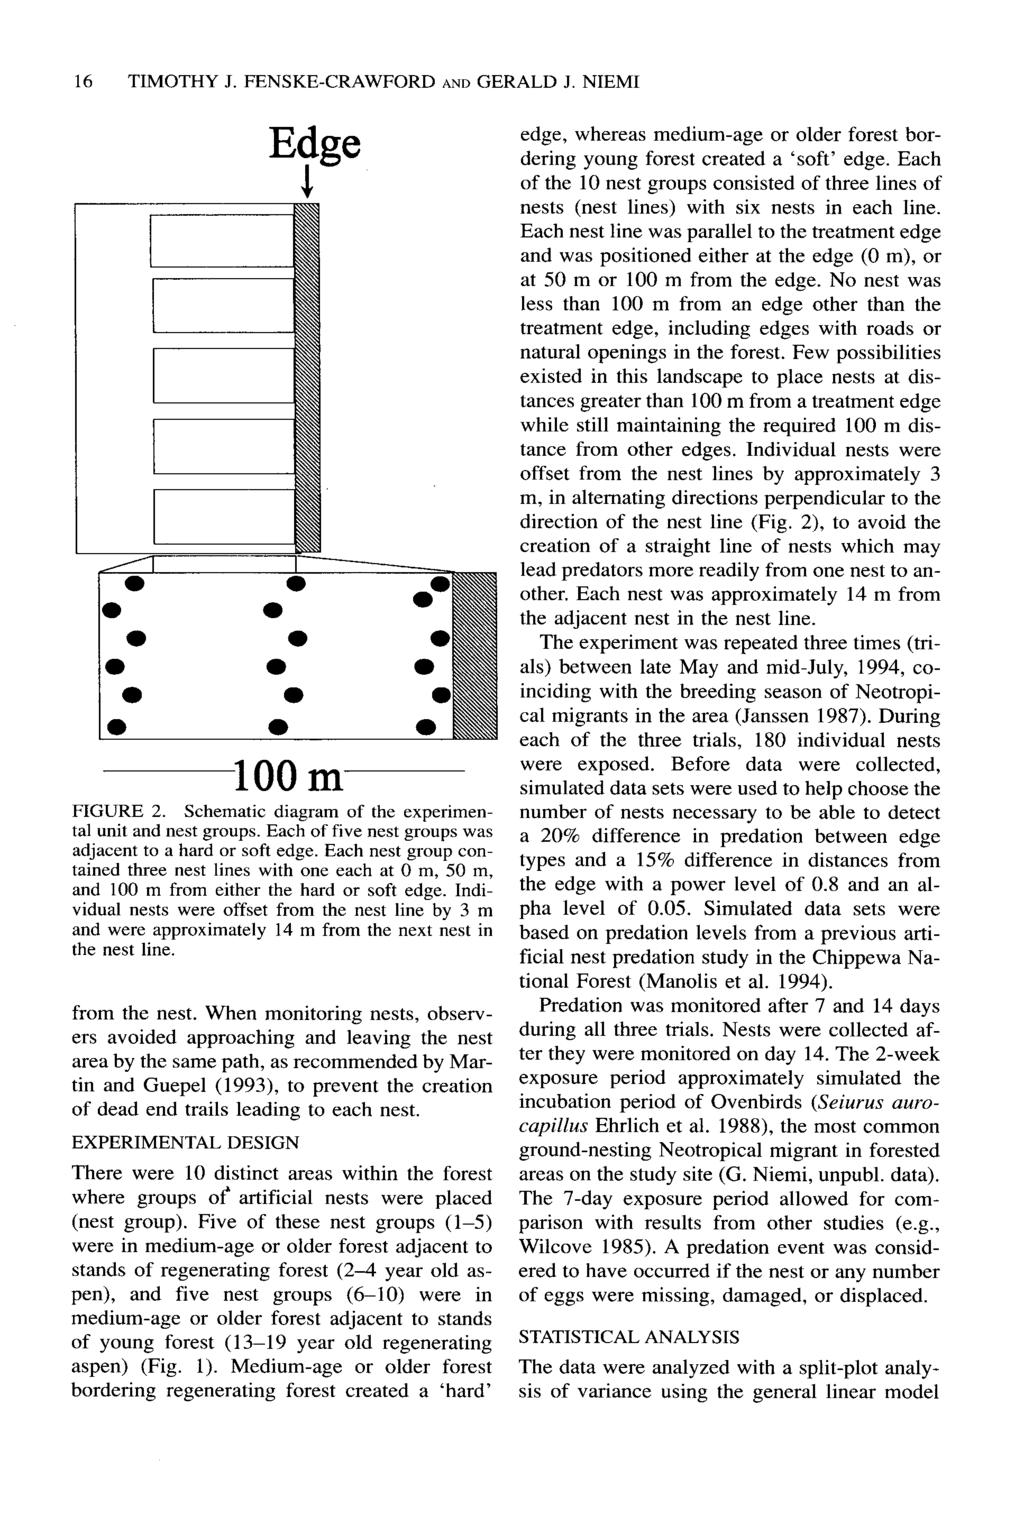 16 TIMOTHY J. FENSKE-CRAWFORD AND GERALD J. NIEMI Edge 1 100 m FIGURE 2. Schematic diagram of the experimental unit and nest groups. Each of five nest groups was adjacent to a hard or soft edge.